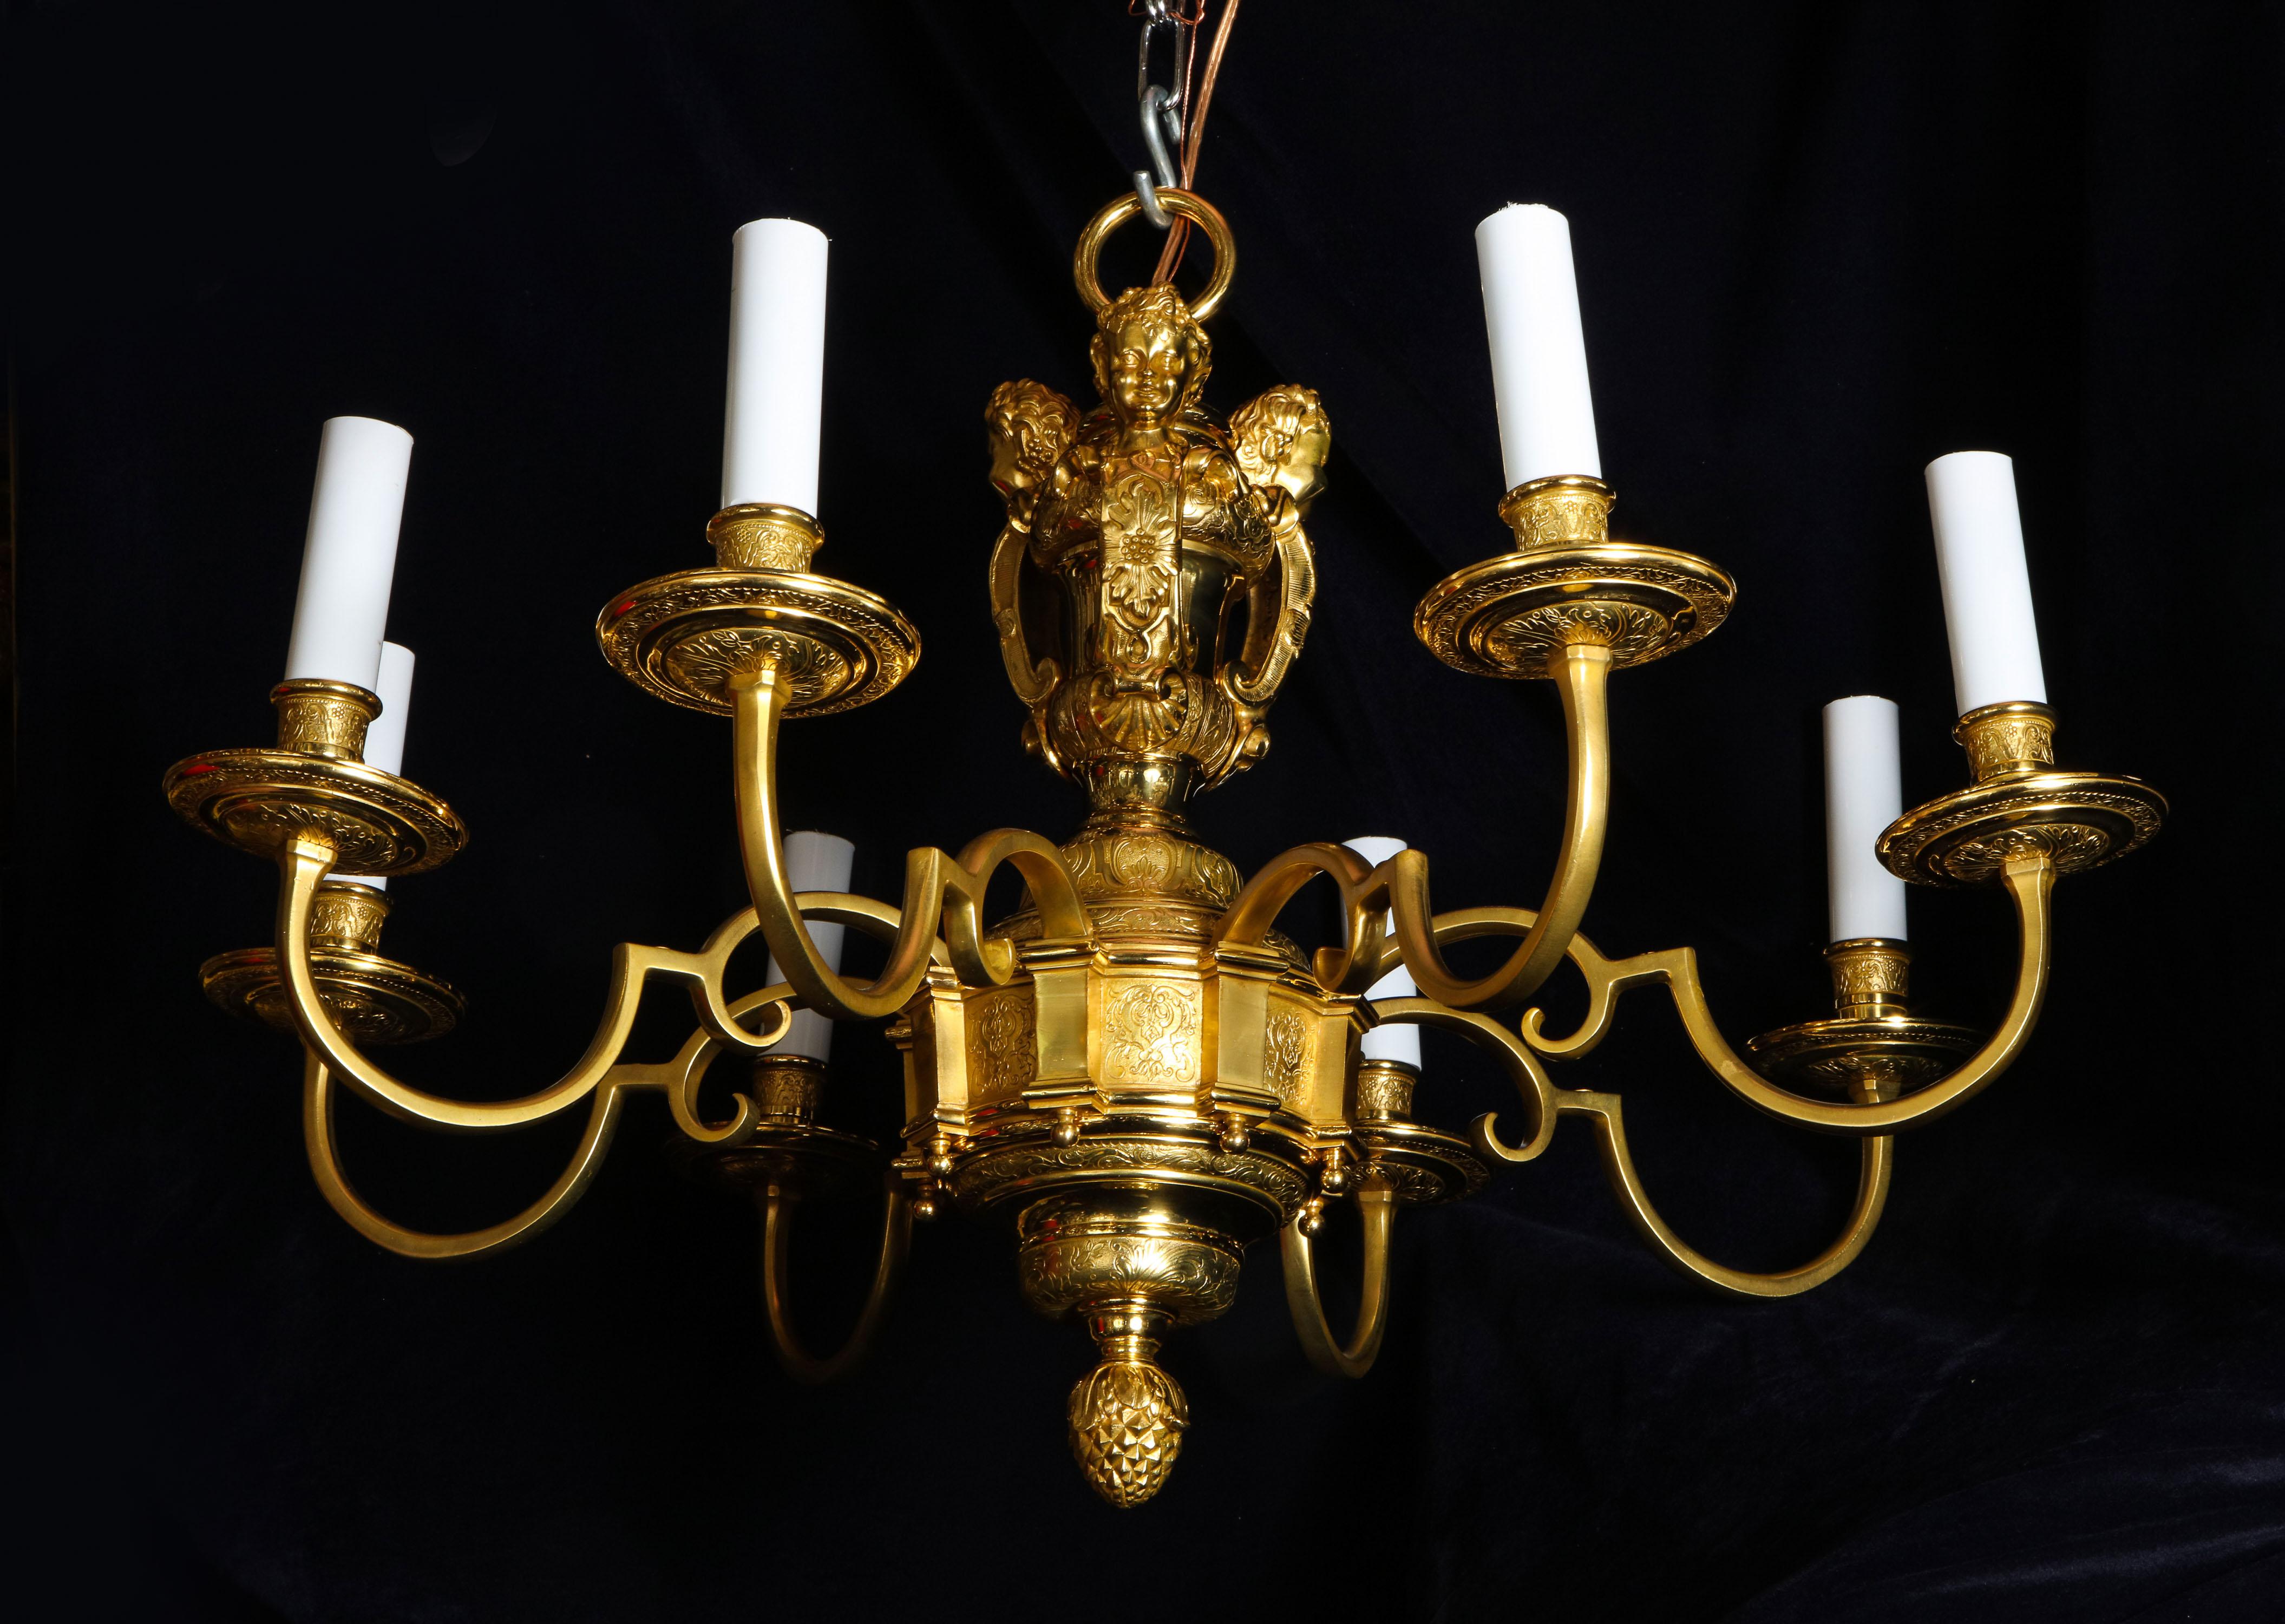 Pair of Fine Antique French Louis XVI Style Gilt Bronze Figural Chandeliers For Sale 7